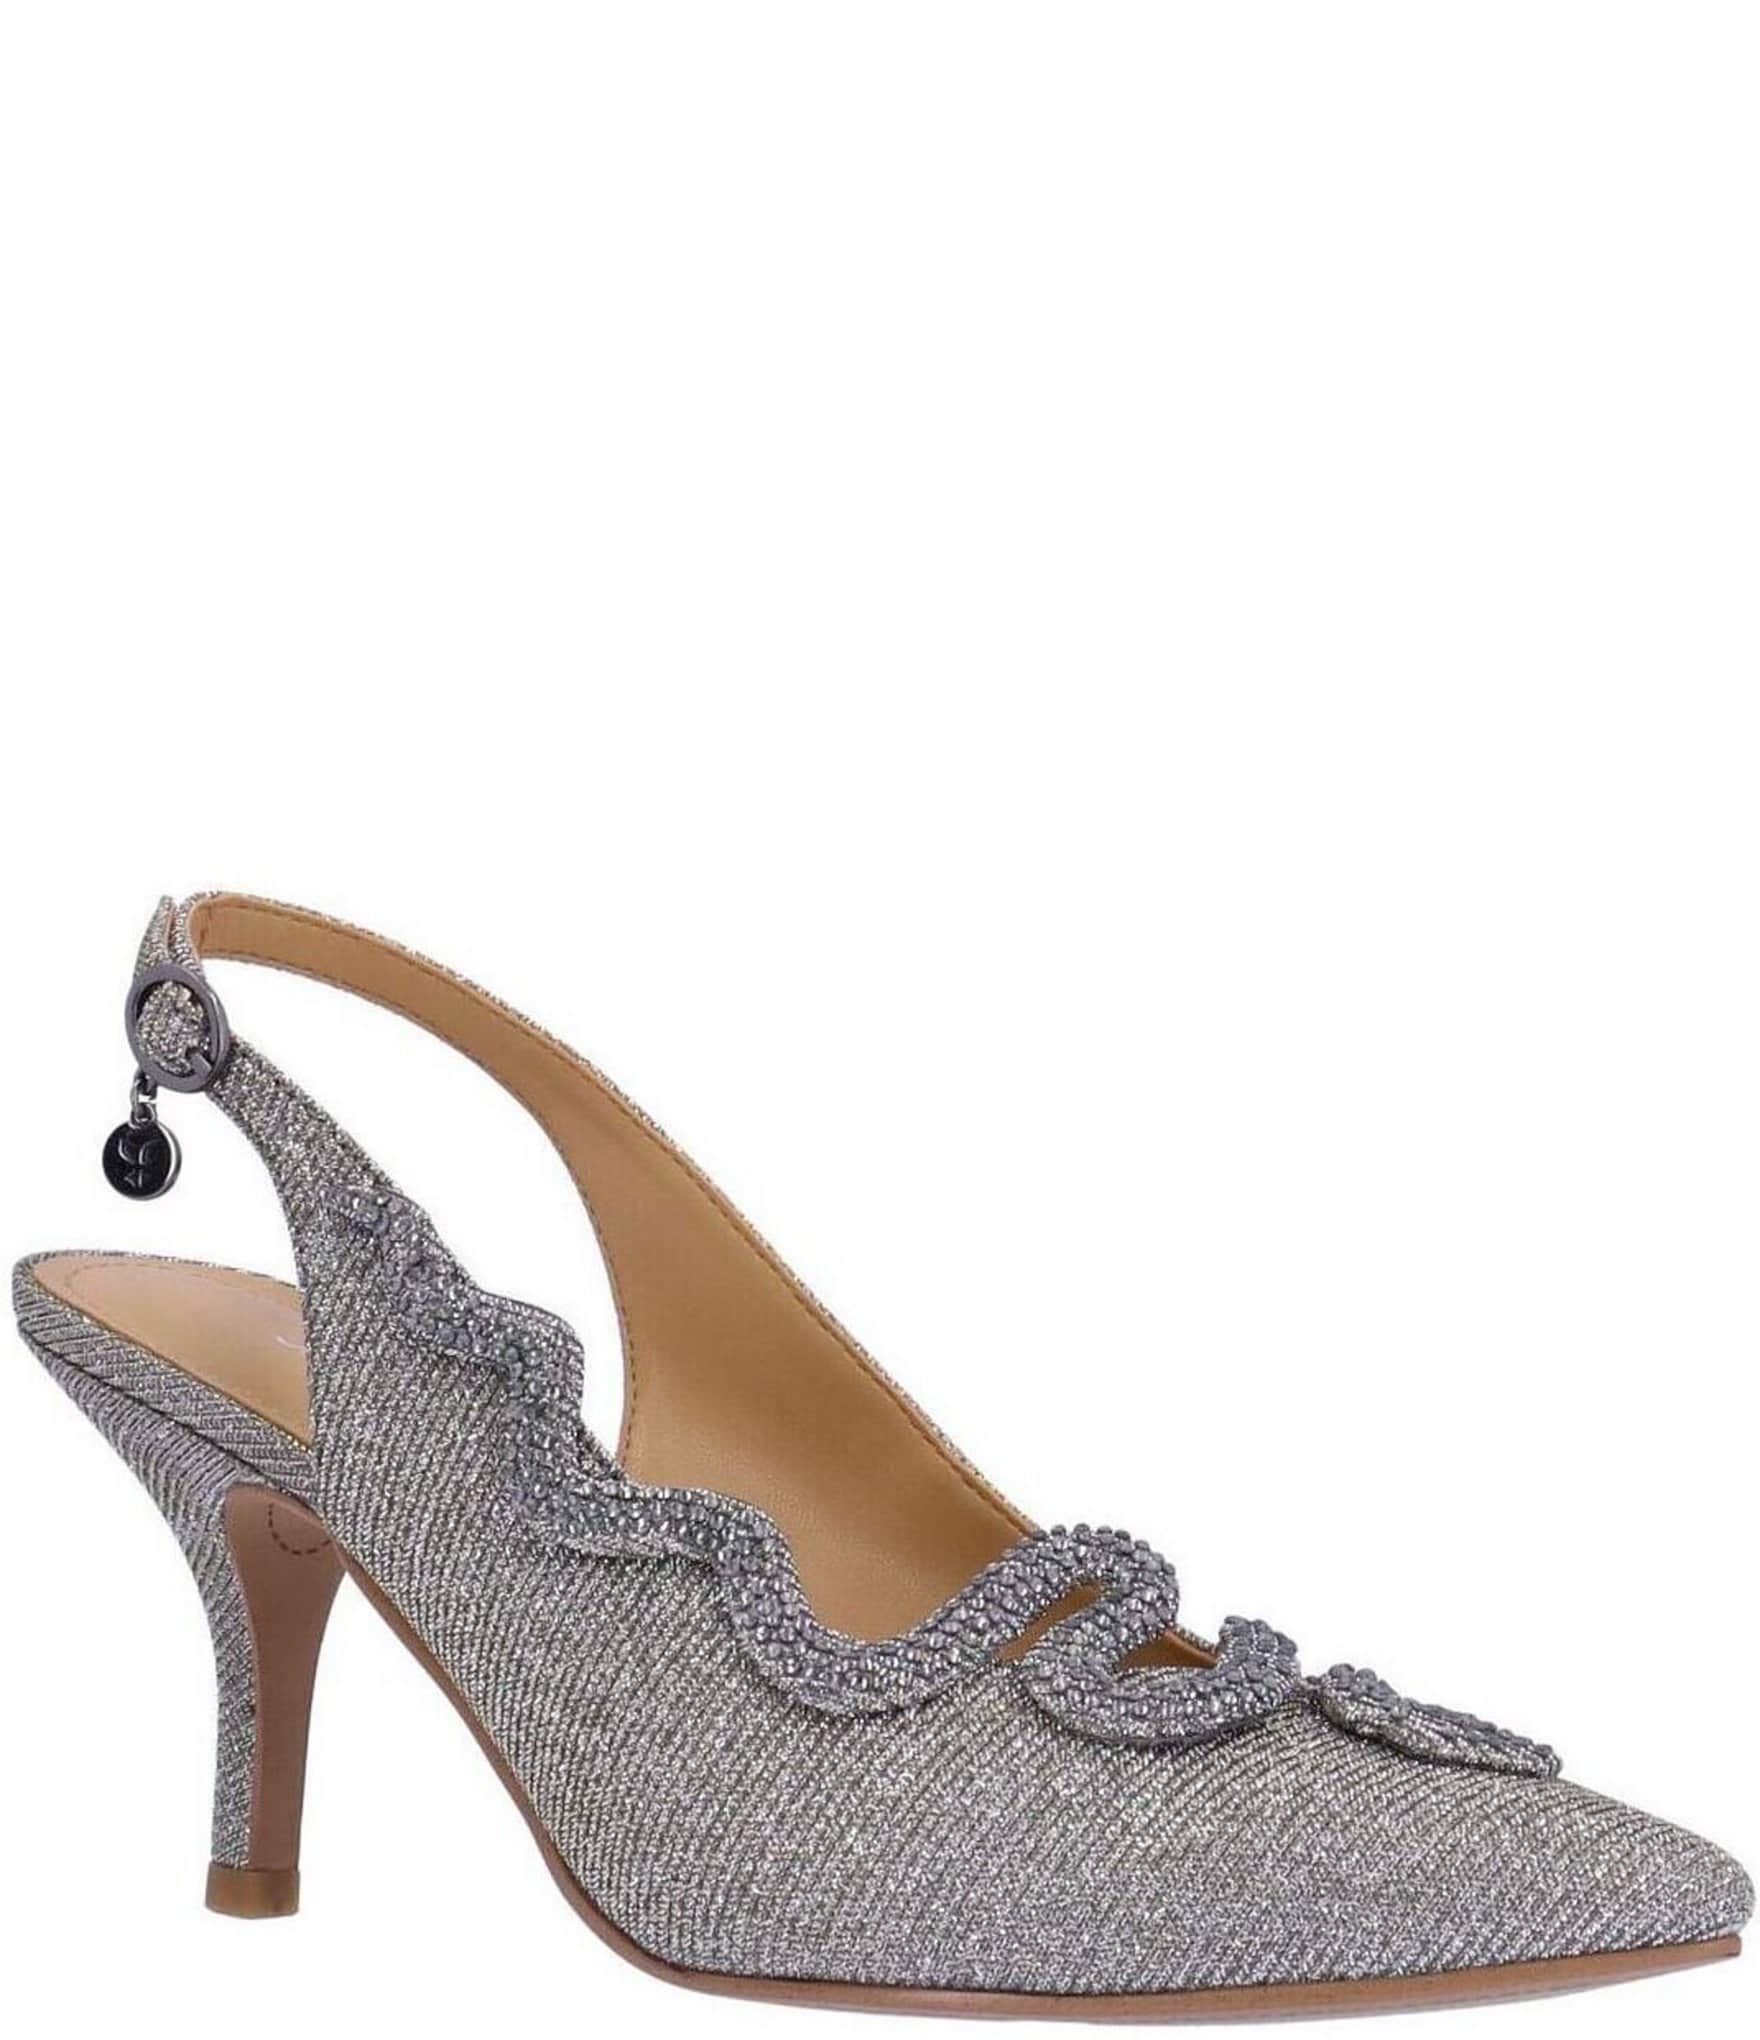 Brielle Pewter Metallic Low Heel Evening Shoes  Evening shoes low heel,  Dress shoes womens, Evening shoes